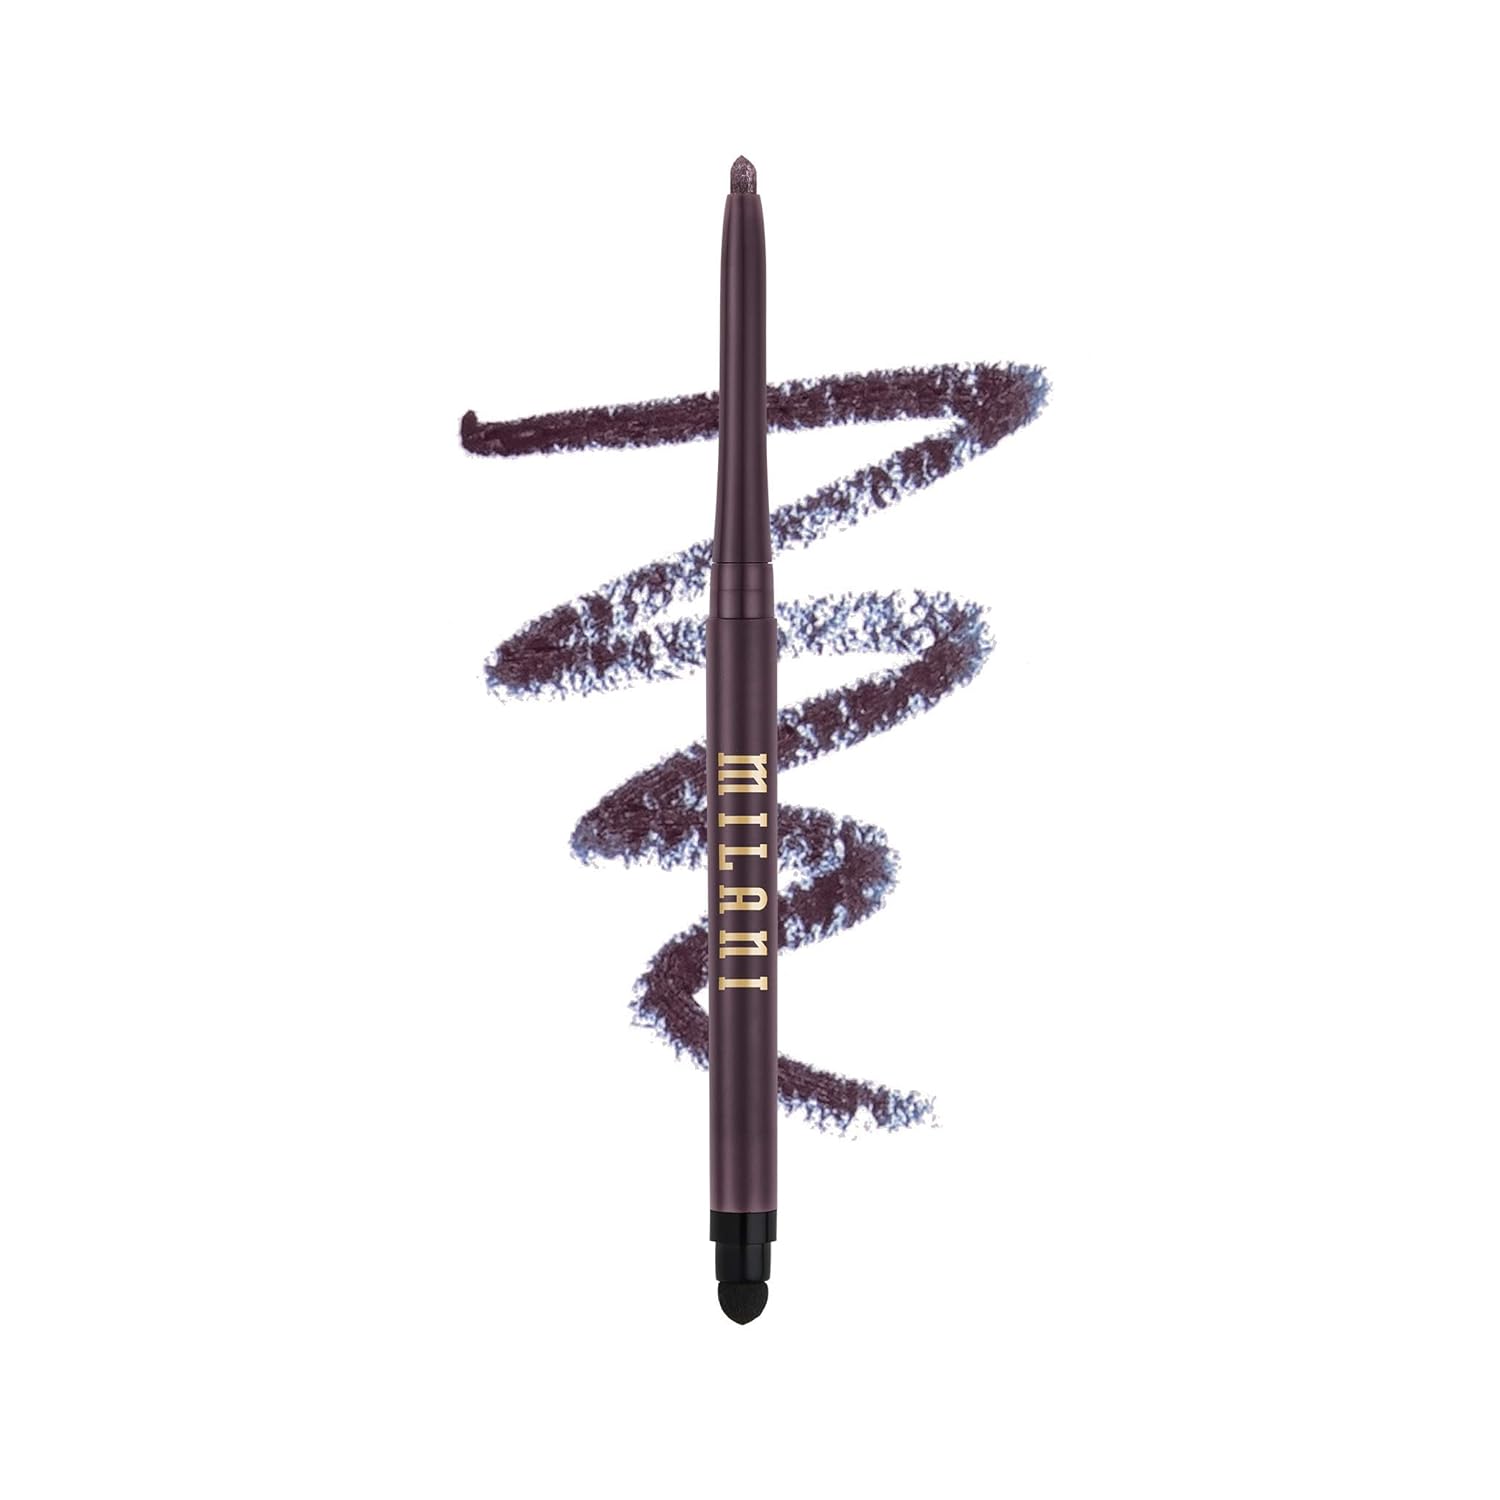 Milani Stay Put Waterproof Eyeliner - Hooked On Espresso (0.04 ) Cruelty-Free Eyeliner - Line & Define Eyes with High Pigment Shades for Long-Lasting Wear